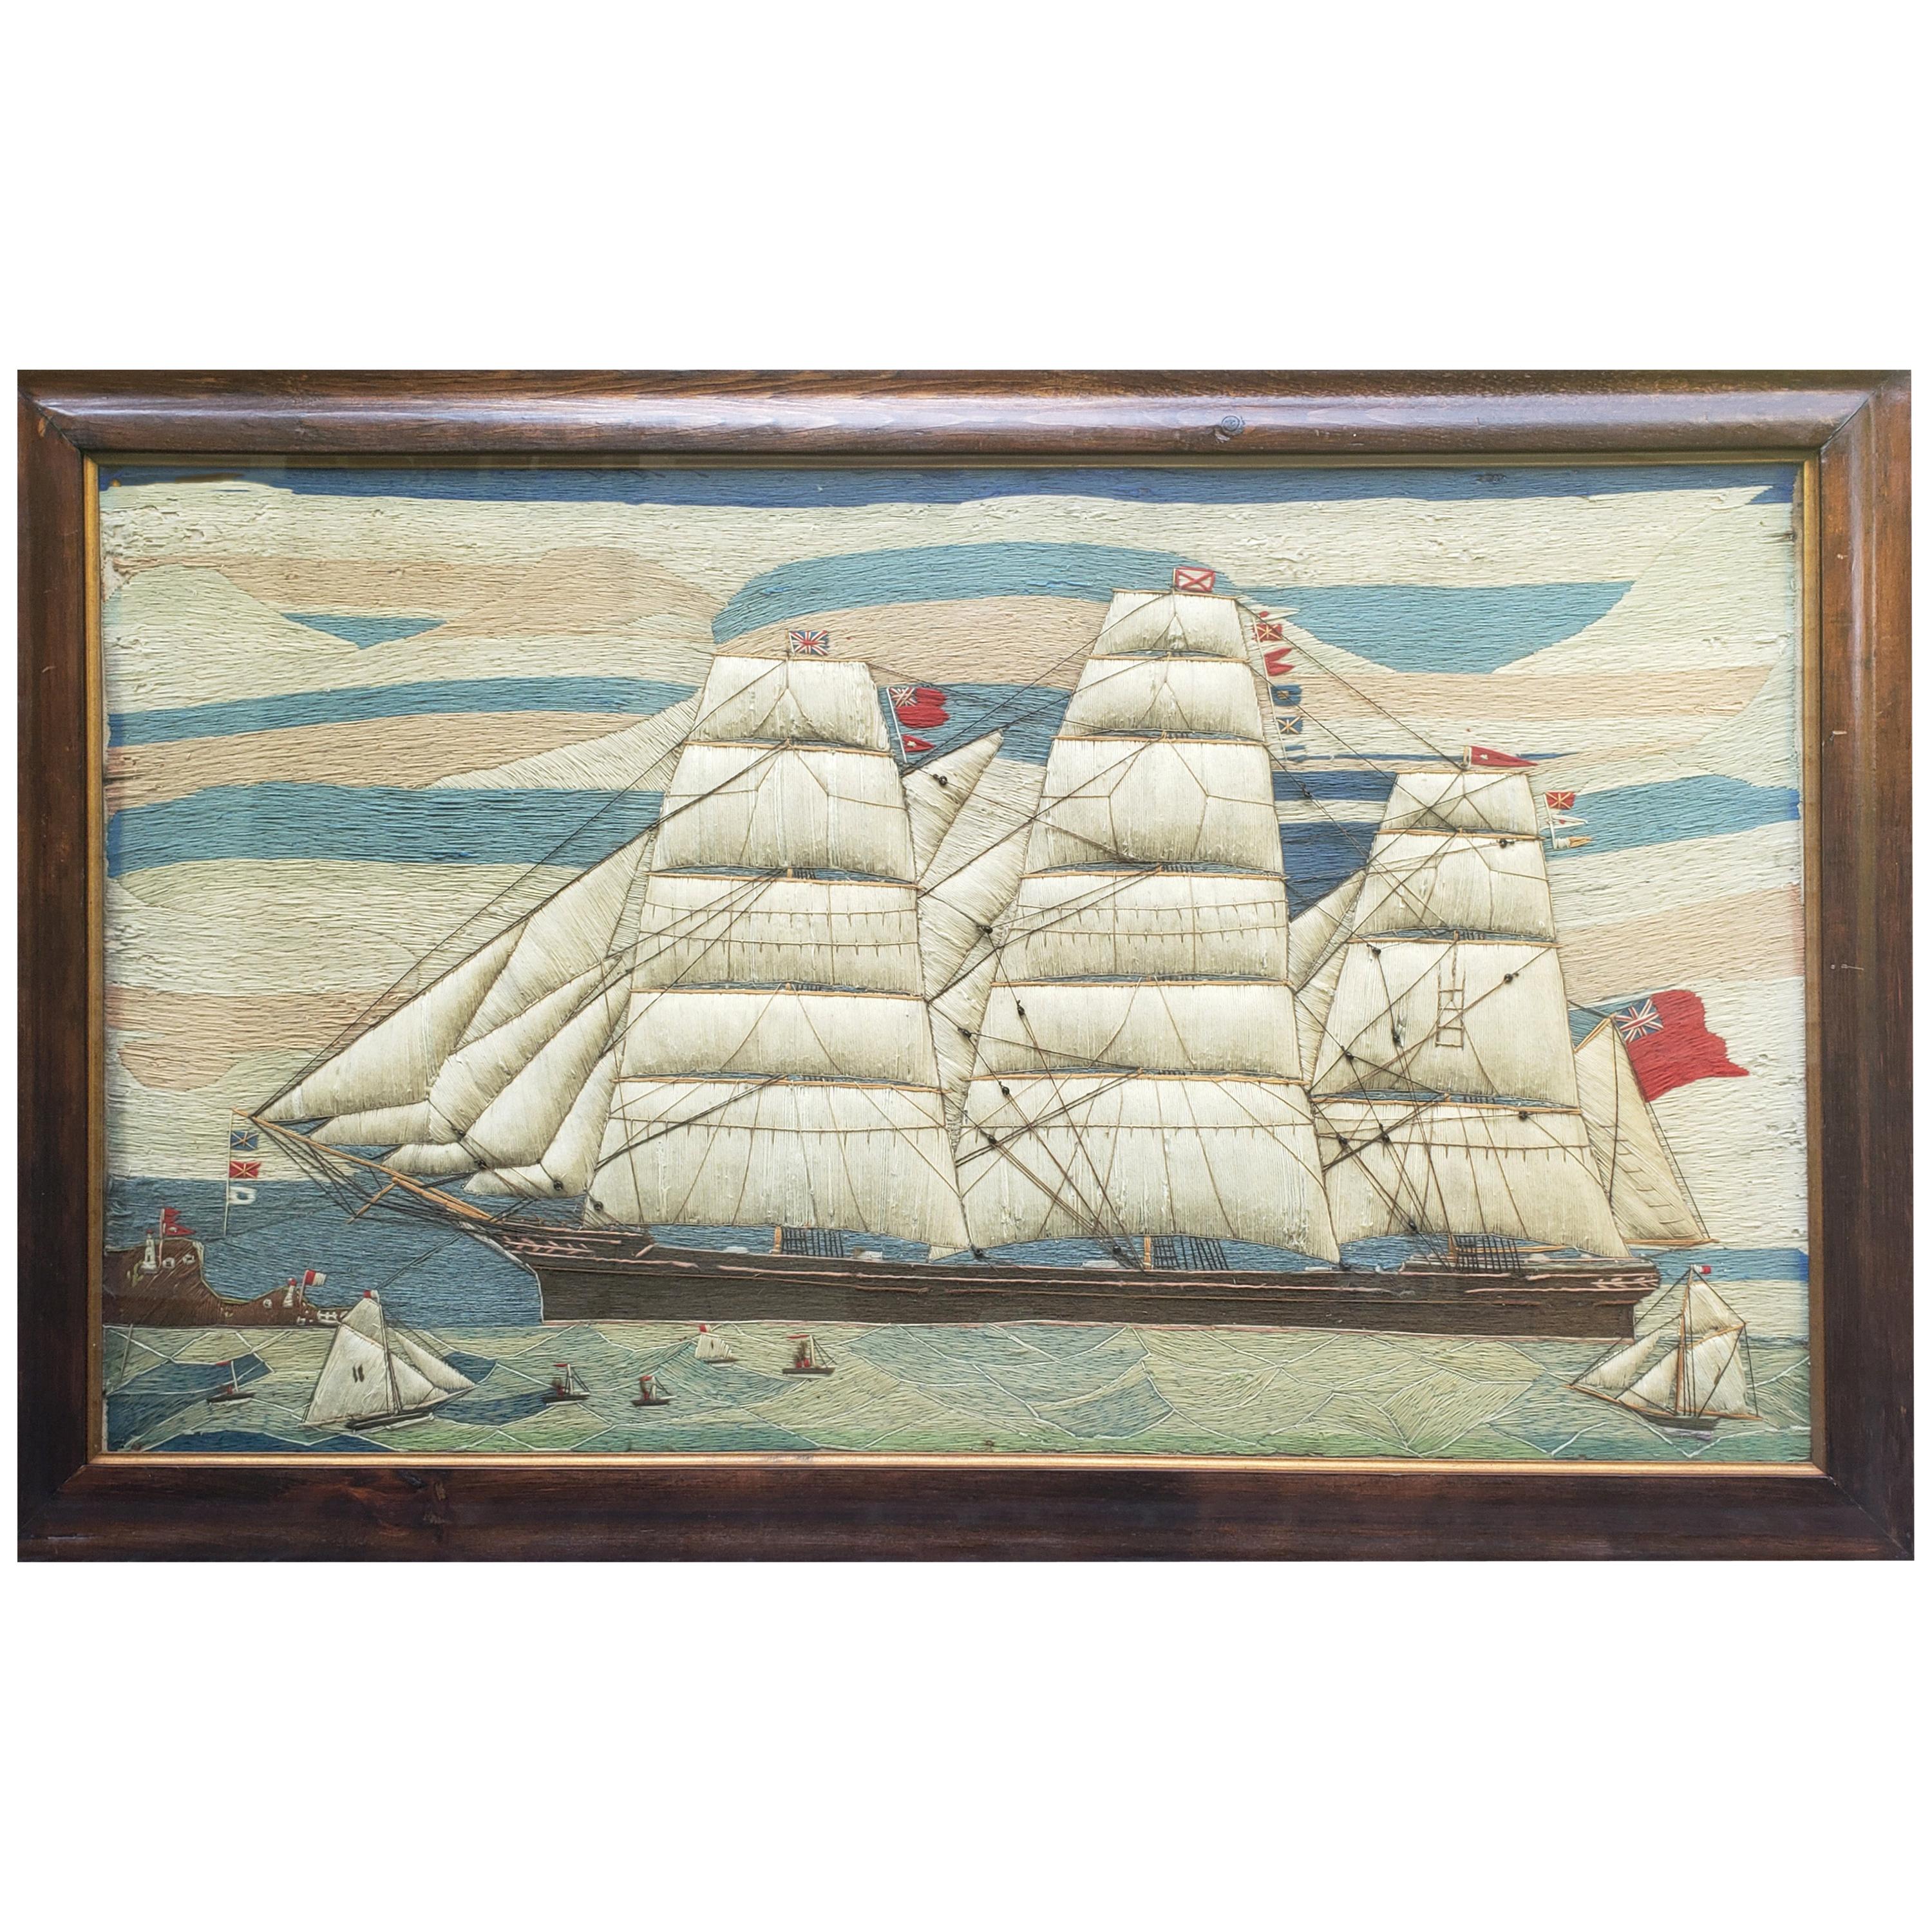 Massive Sailor's Woolwork of a British Merchant Navy Clipper Ship